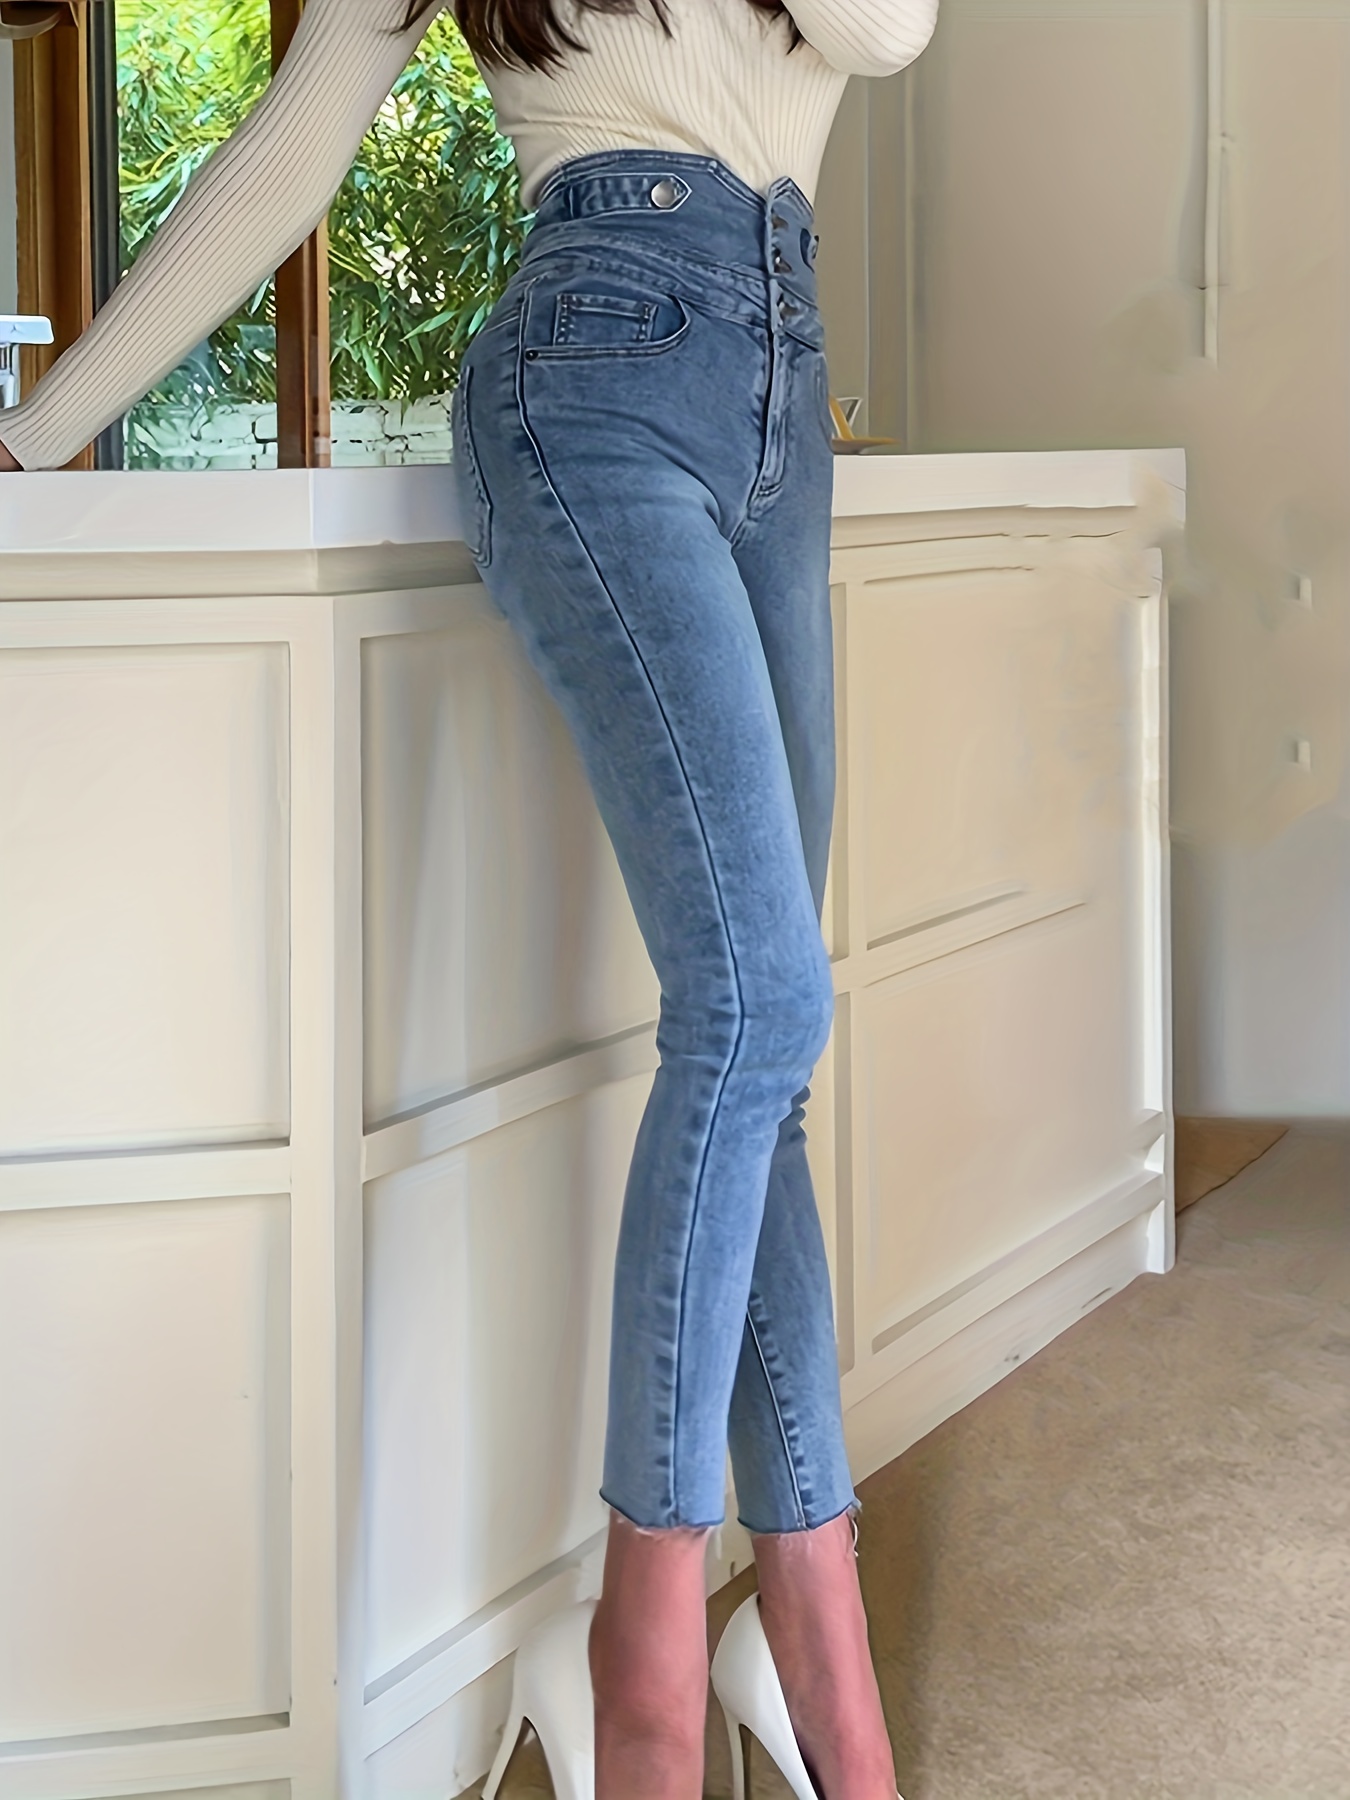 High Waist Tummy Control * Cut Denim Pants, Multi Buttons Single-breasted  Elegant Washed Blue Skinny Jeans, Women's Denim Jeans & Clothing